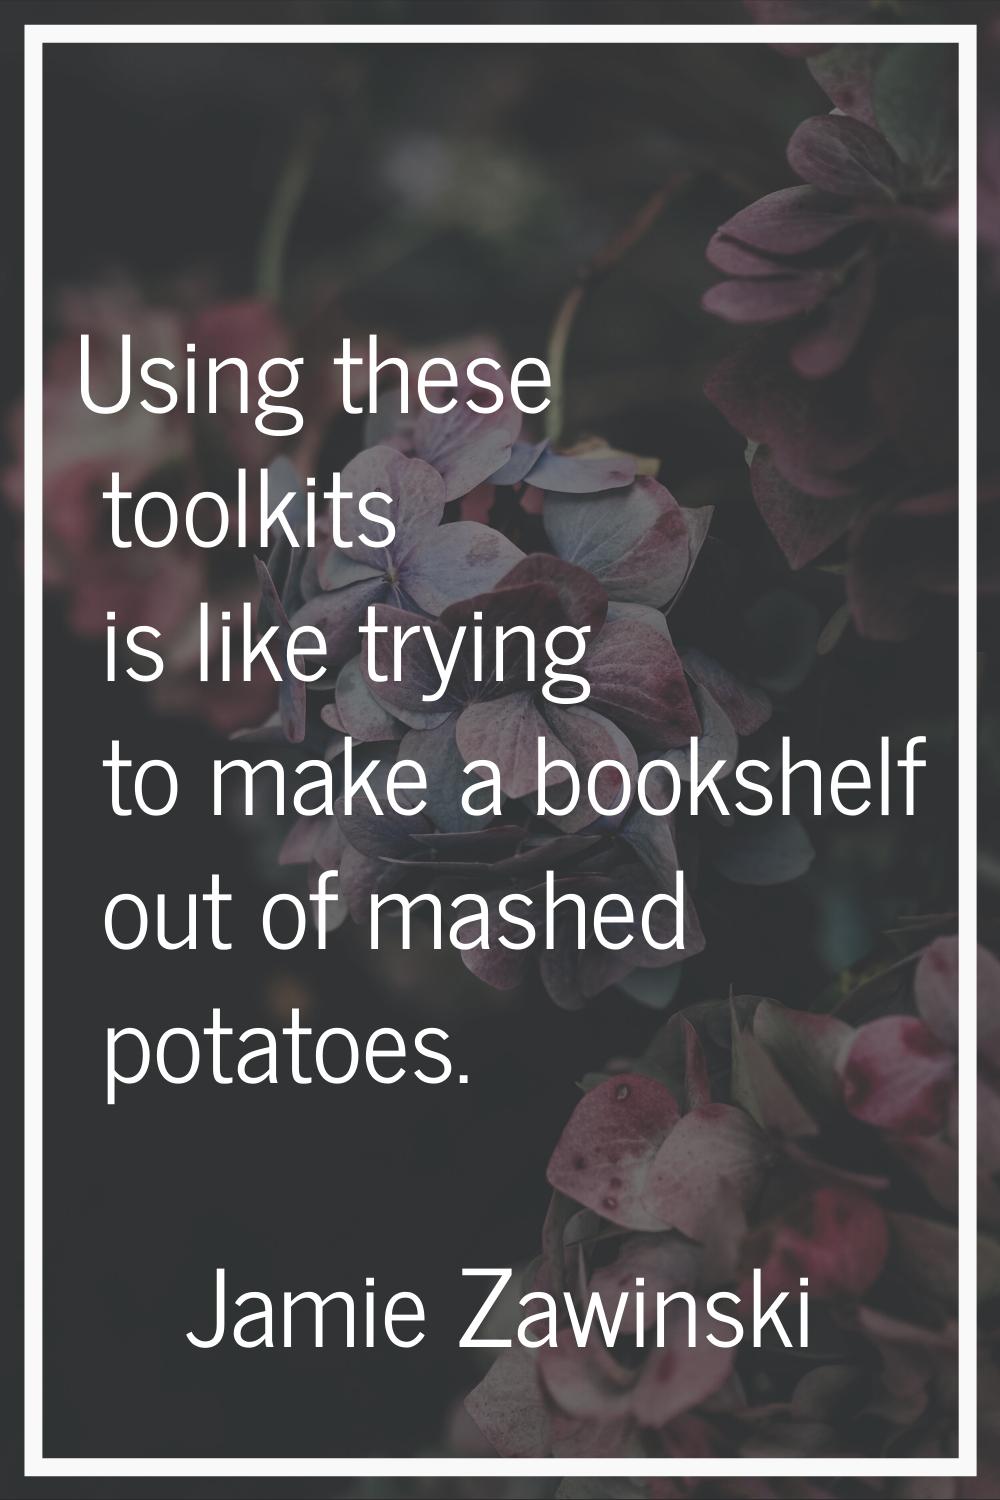 Using these toolkits is like trying to make a bookshelf out of mashed potatoes.